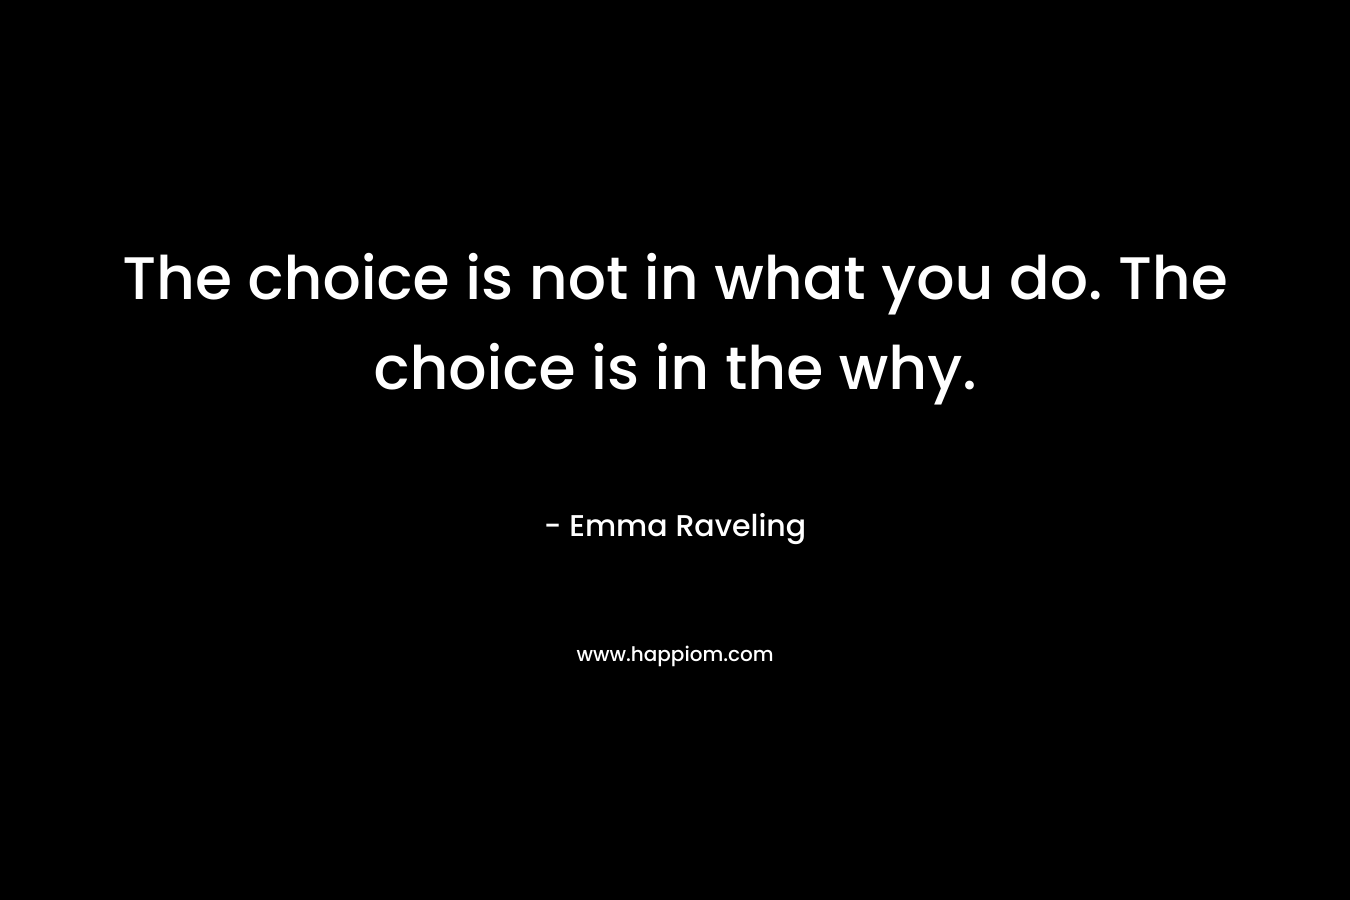 The choice is not in what you do. The choice is in the why.